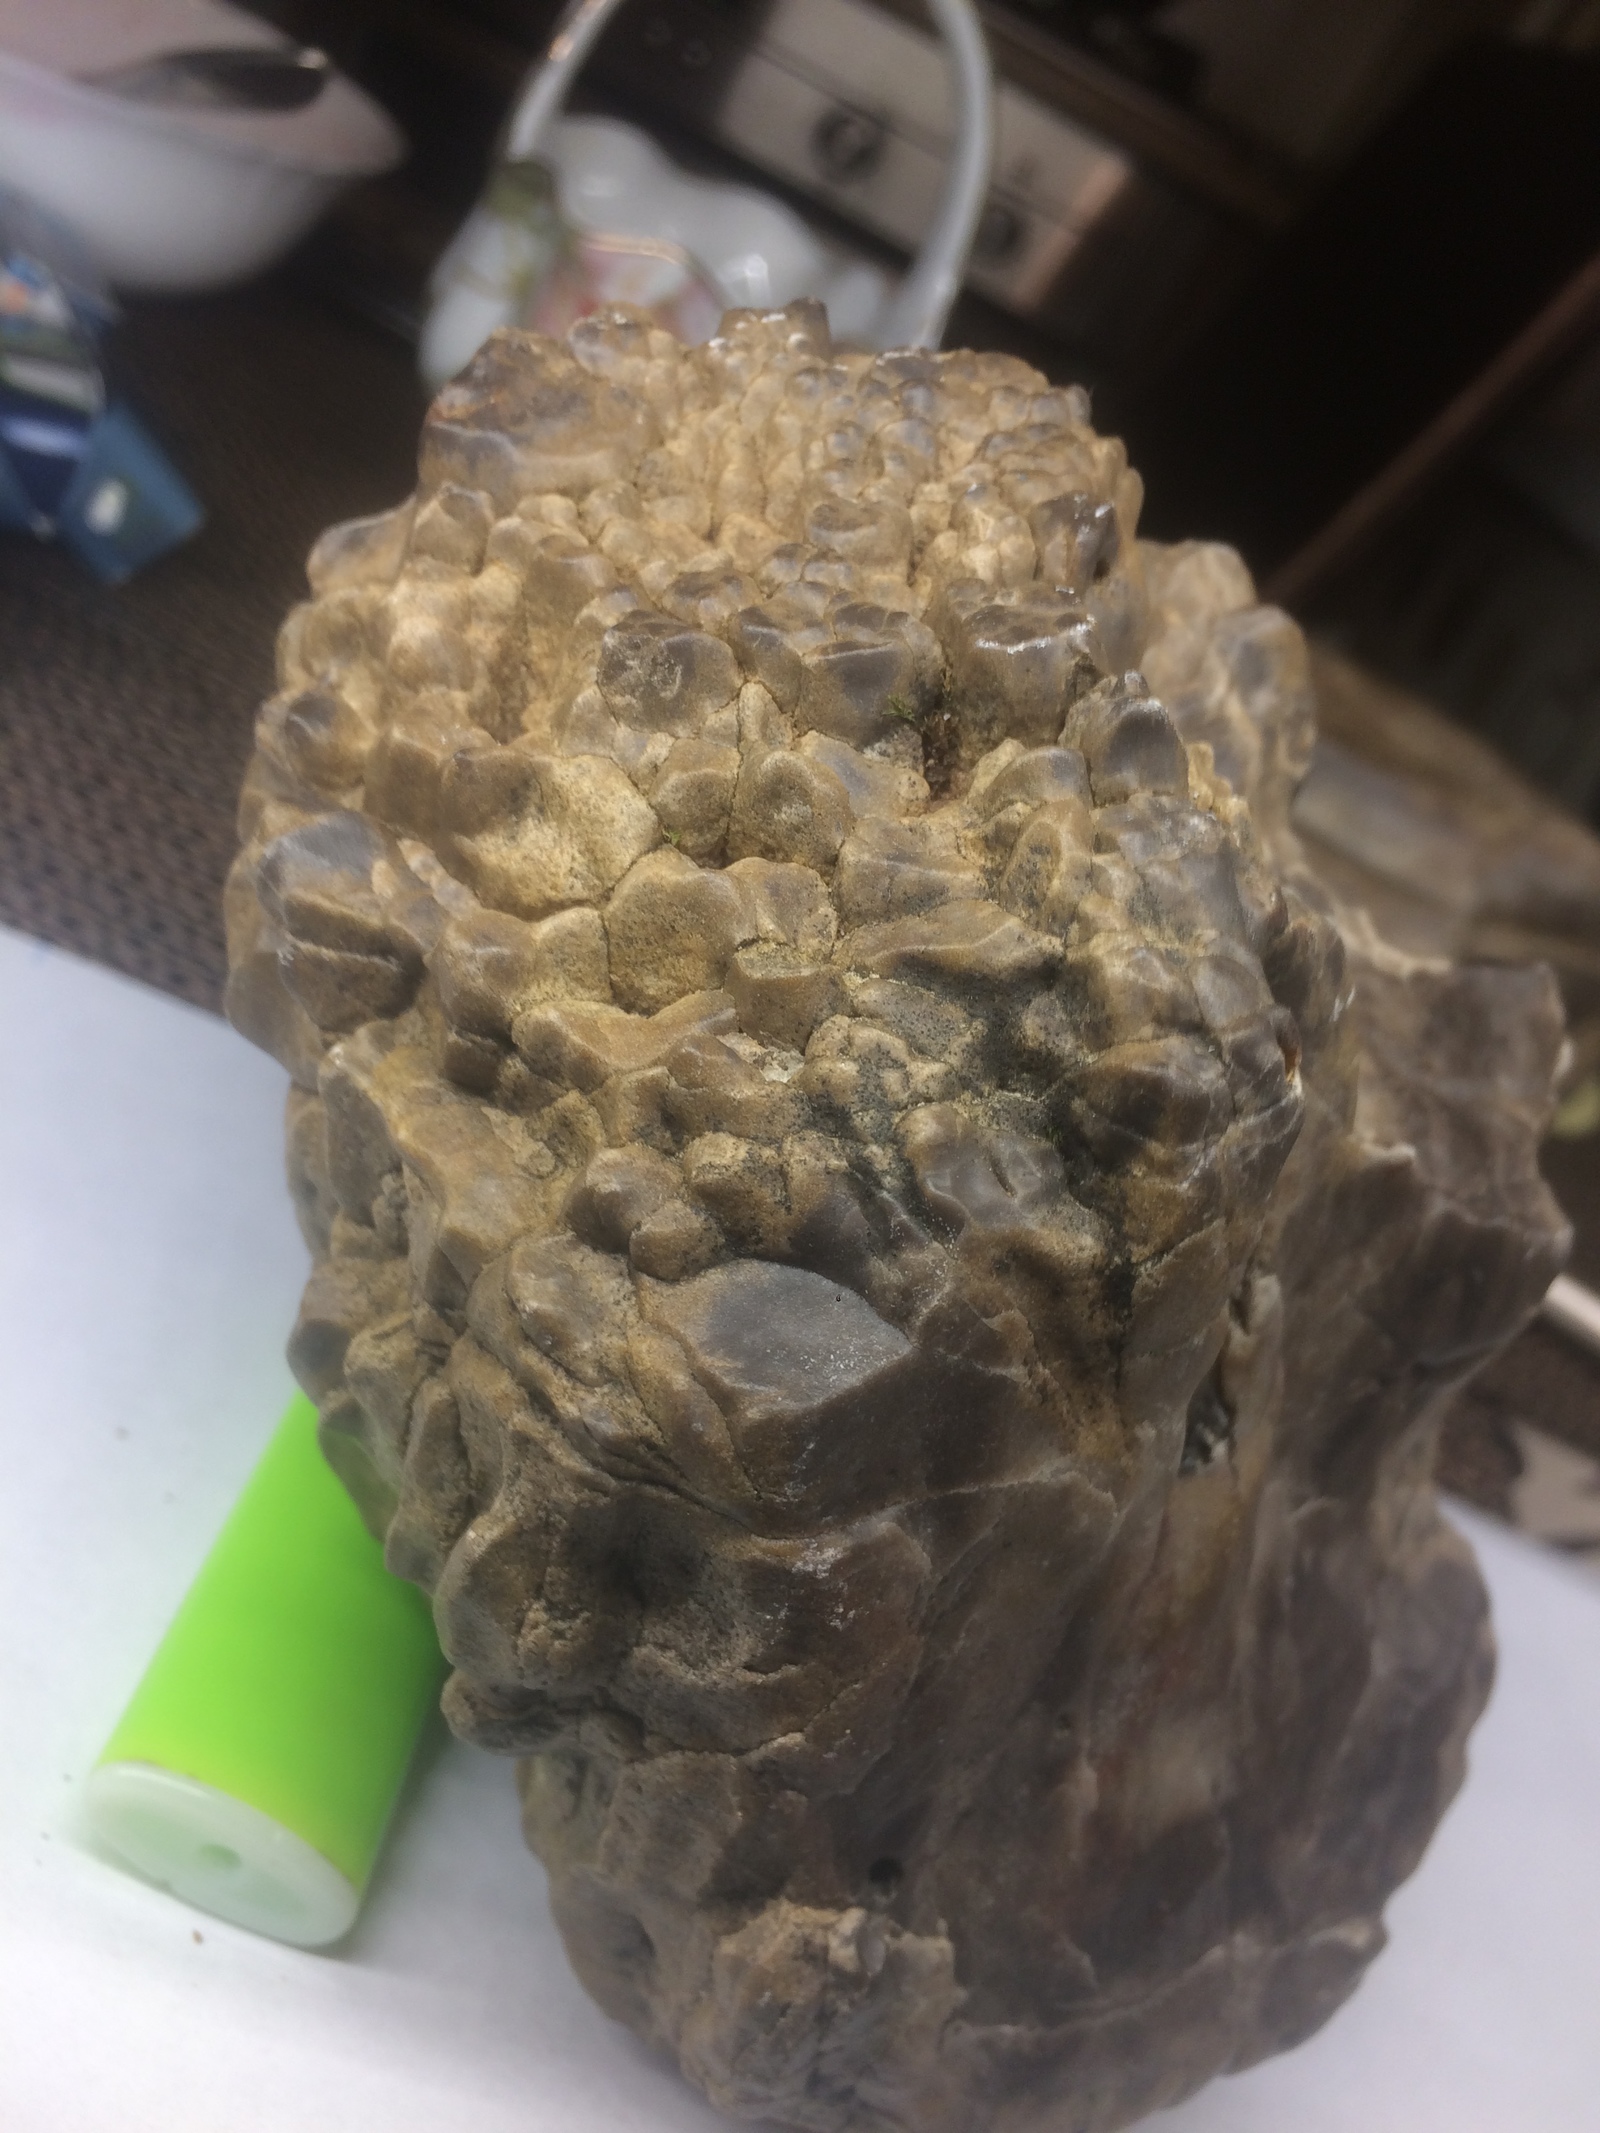 What are these stones? - My, Mineralogy, Geologists, Aquarium, Aquascape, Fossil, A rock, Geology, Longpost